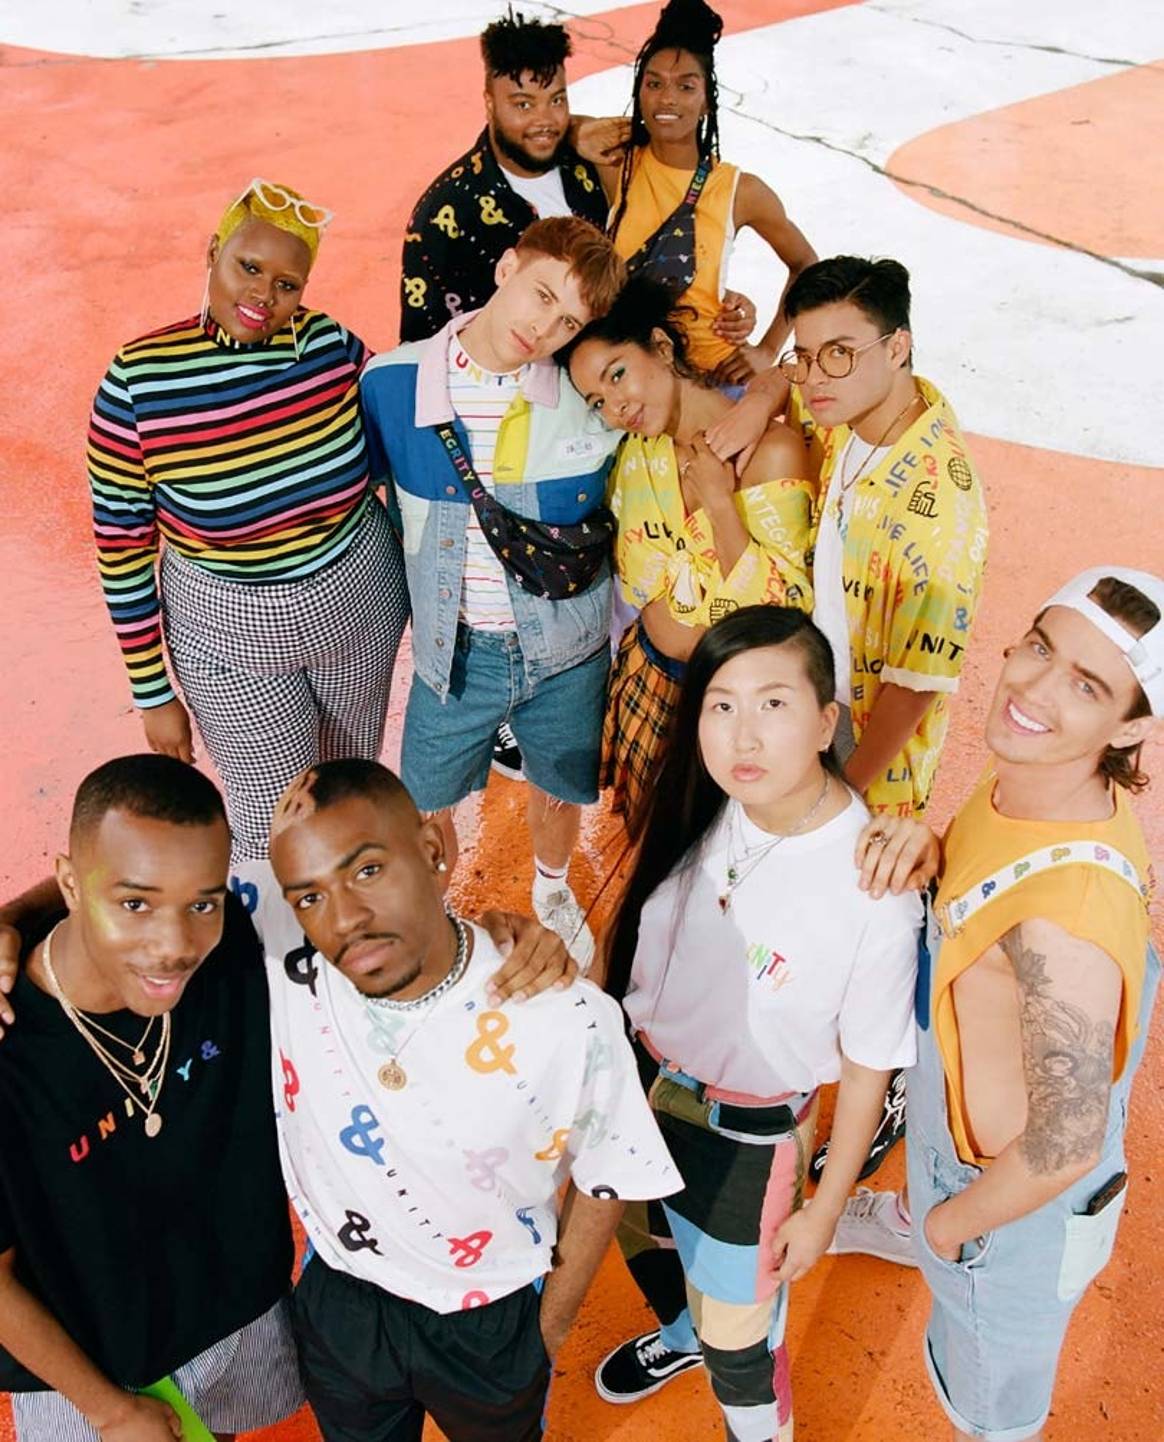 In Pictures: Asos and Glaad partner up once again for Pride collection